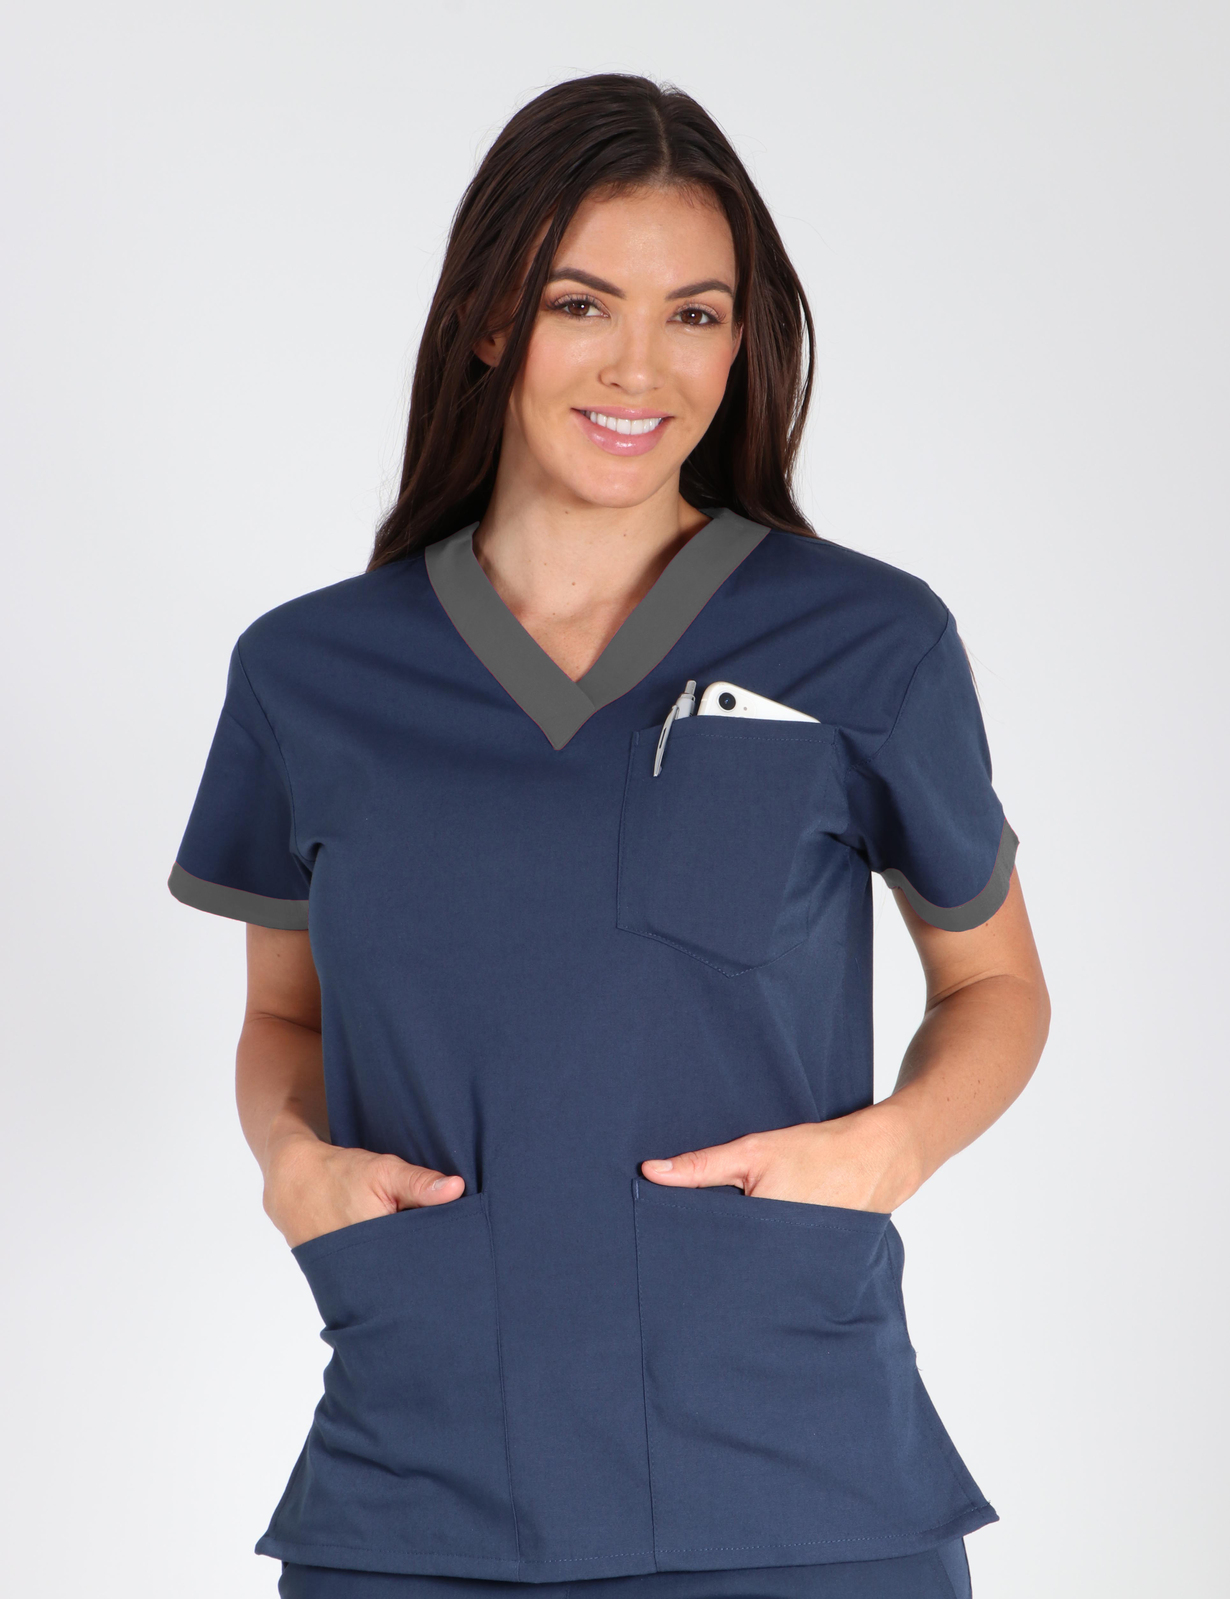 Perth Hospital - Consultant Radiologist (Contrast V-neck in Navy with Steel Grey Trim incl Logos)